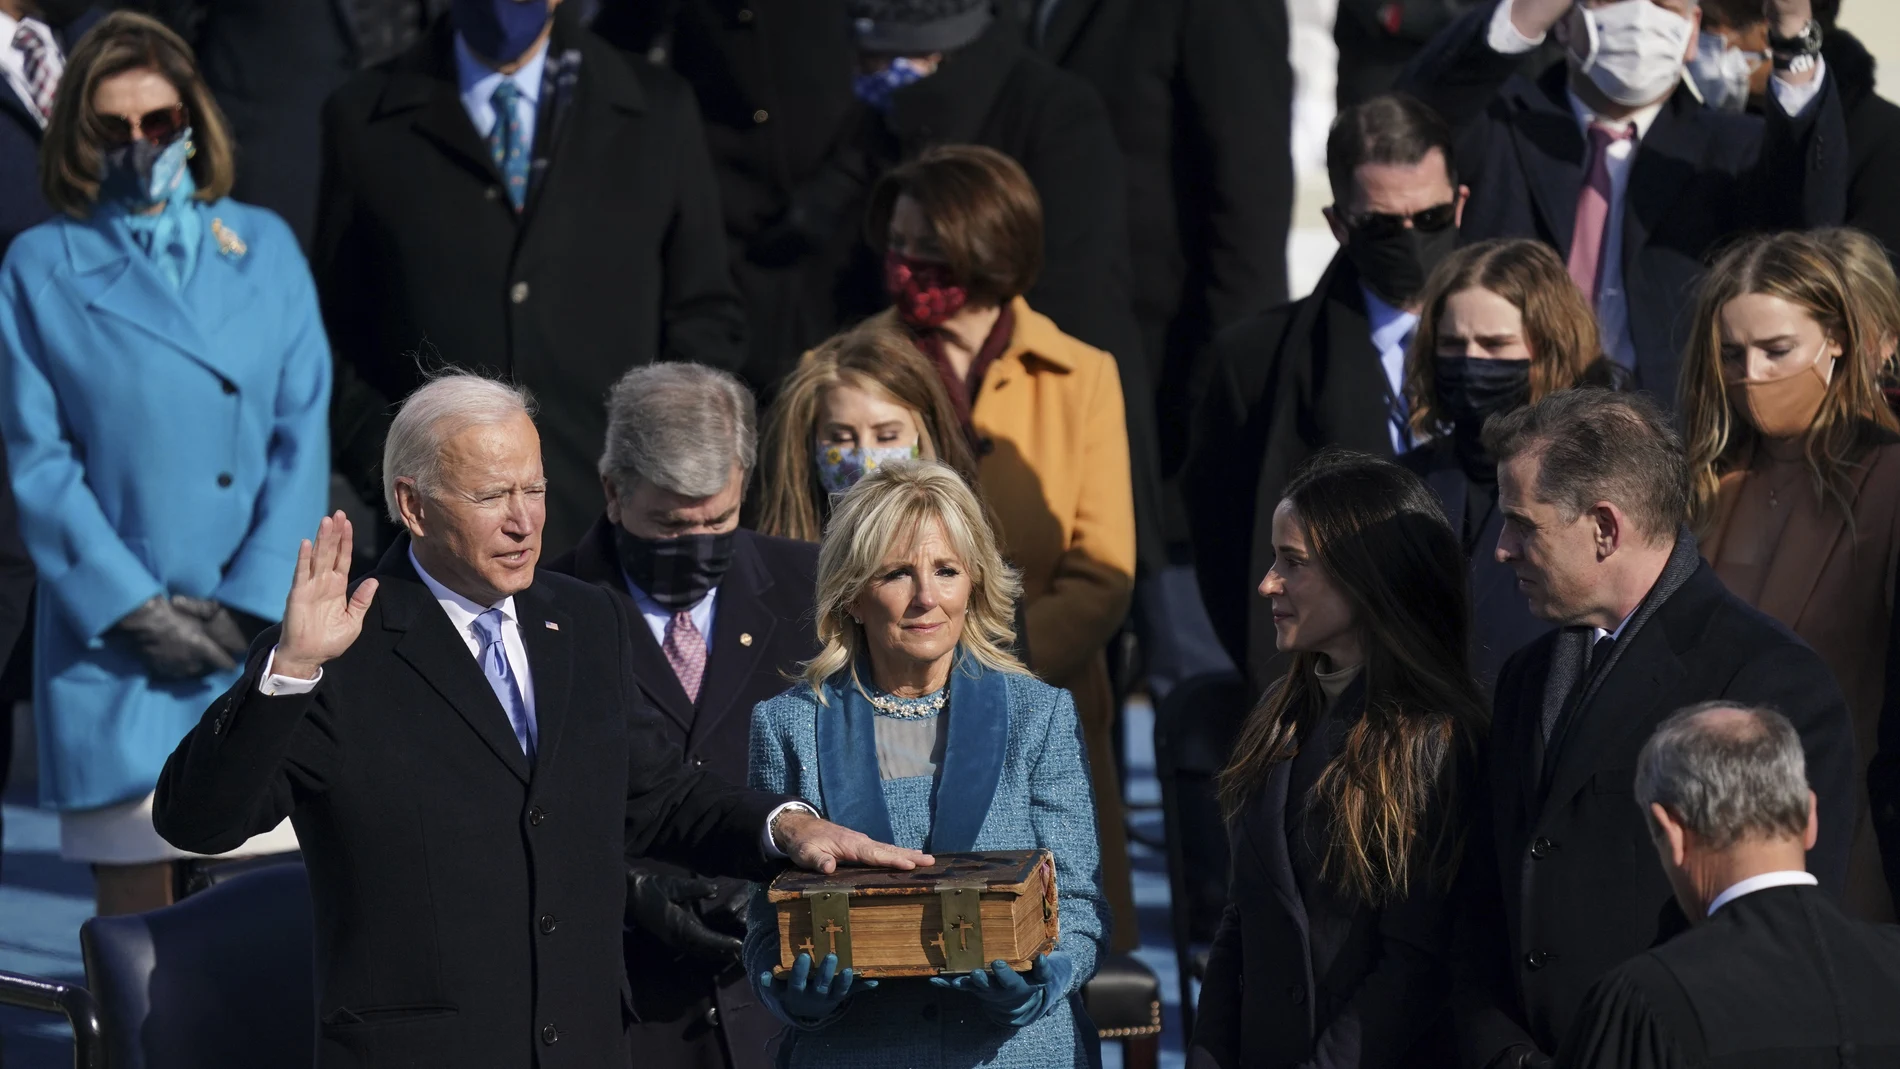 Joe Biden is sworn in as the 46th President of the United States on Capitol Hill in Washington on Wednesday, Jan. 20, 2021. (Erin Schaff/The New York Times via AP, Pool)